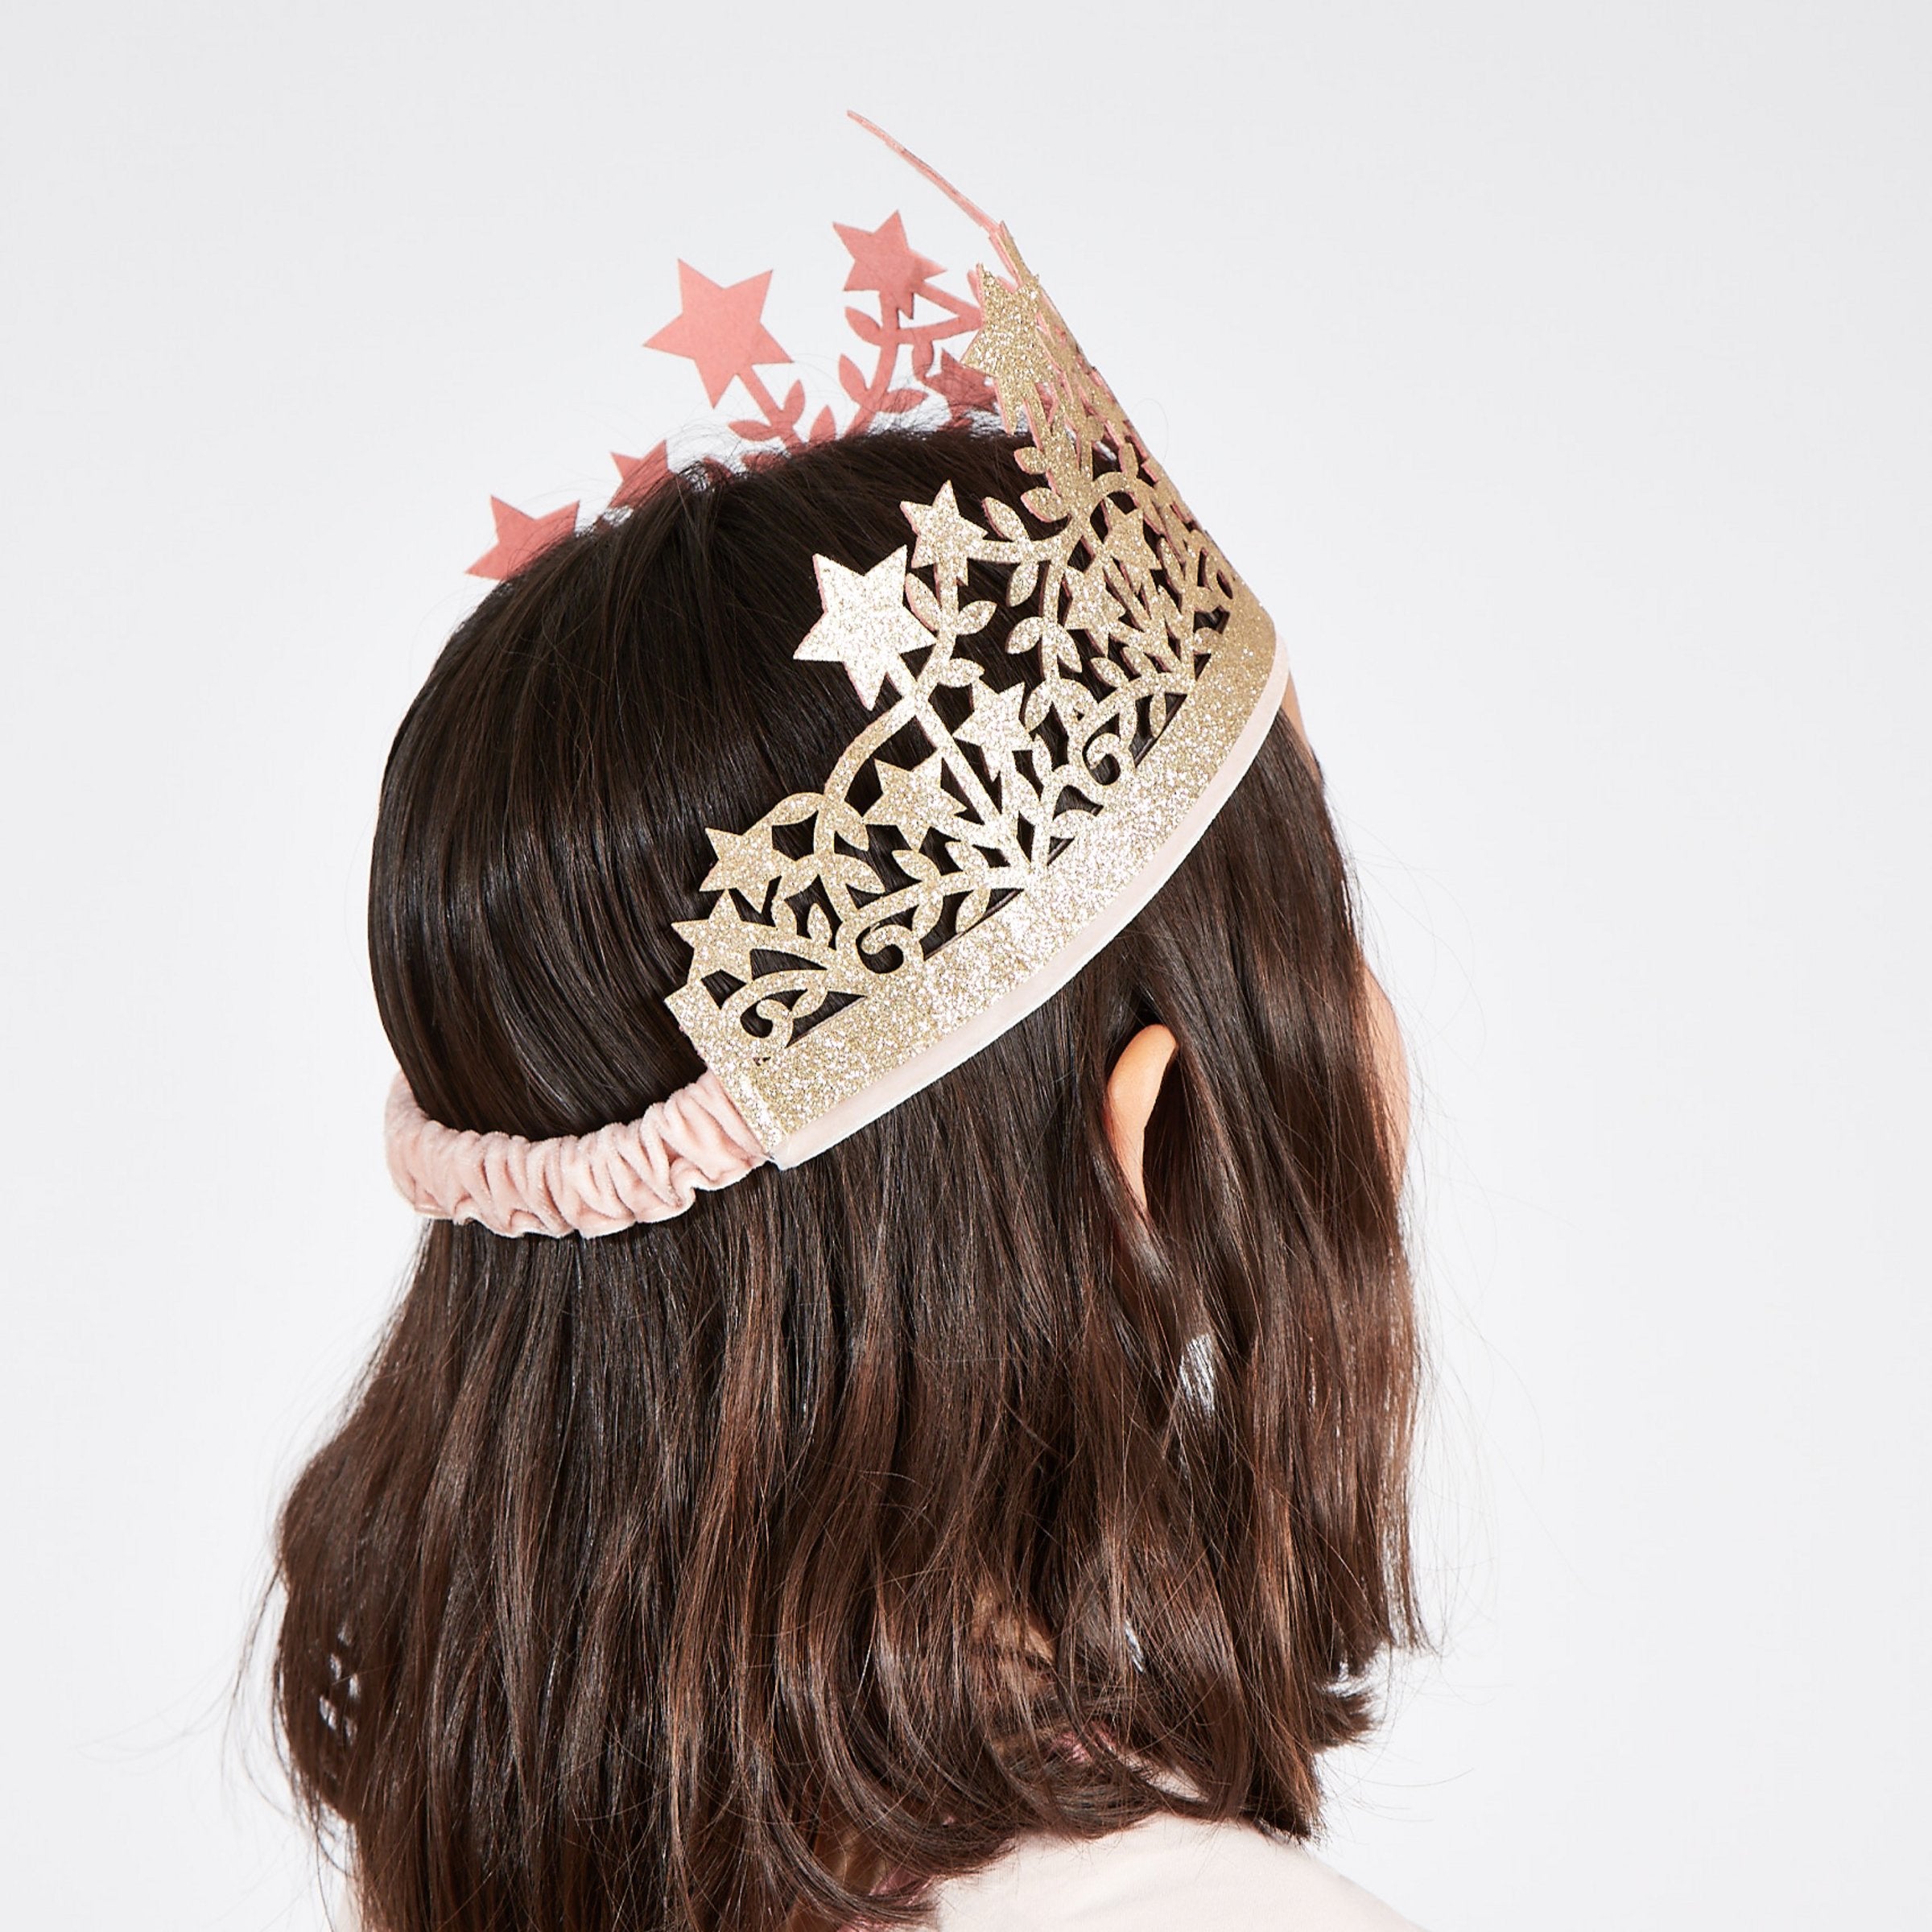 Our gold crown, made with gold glitter fabric, is the perfect kids' crown.